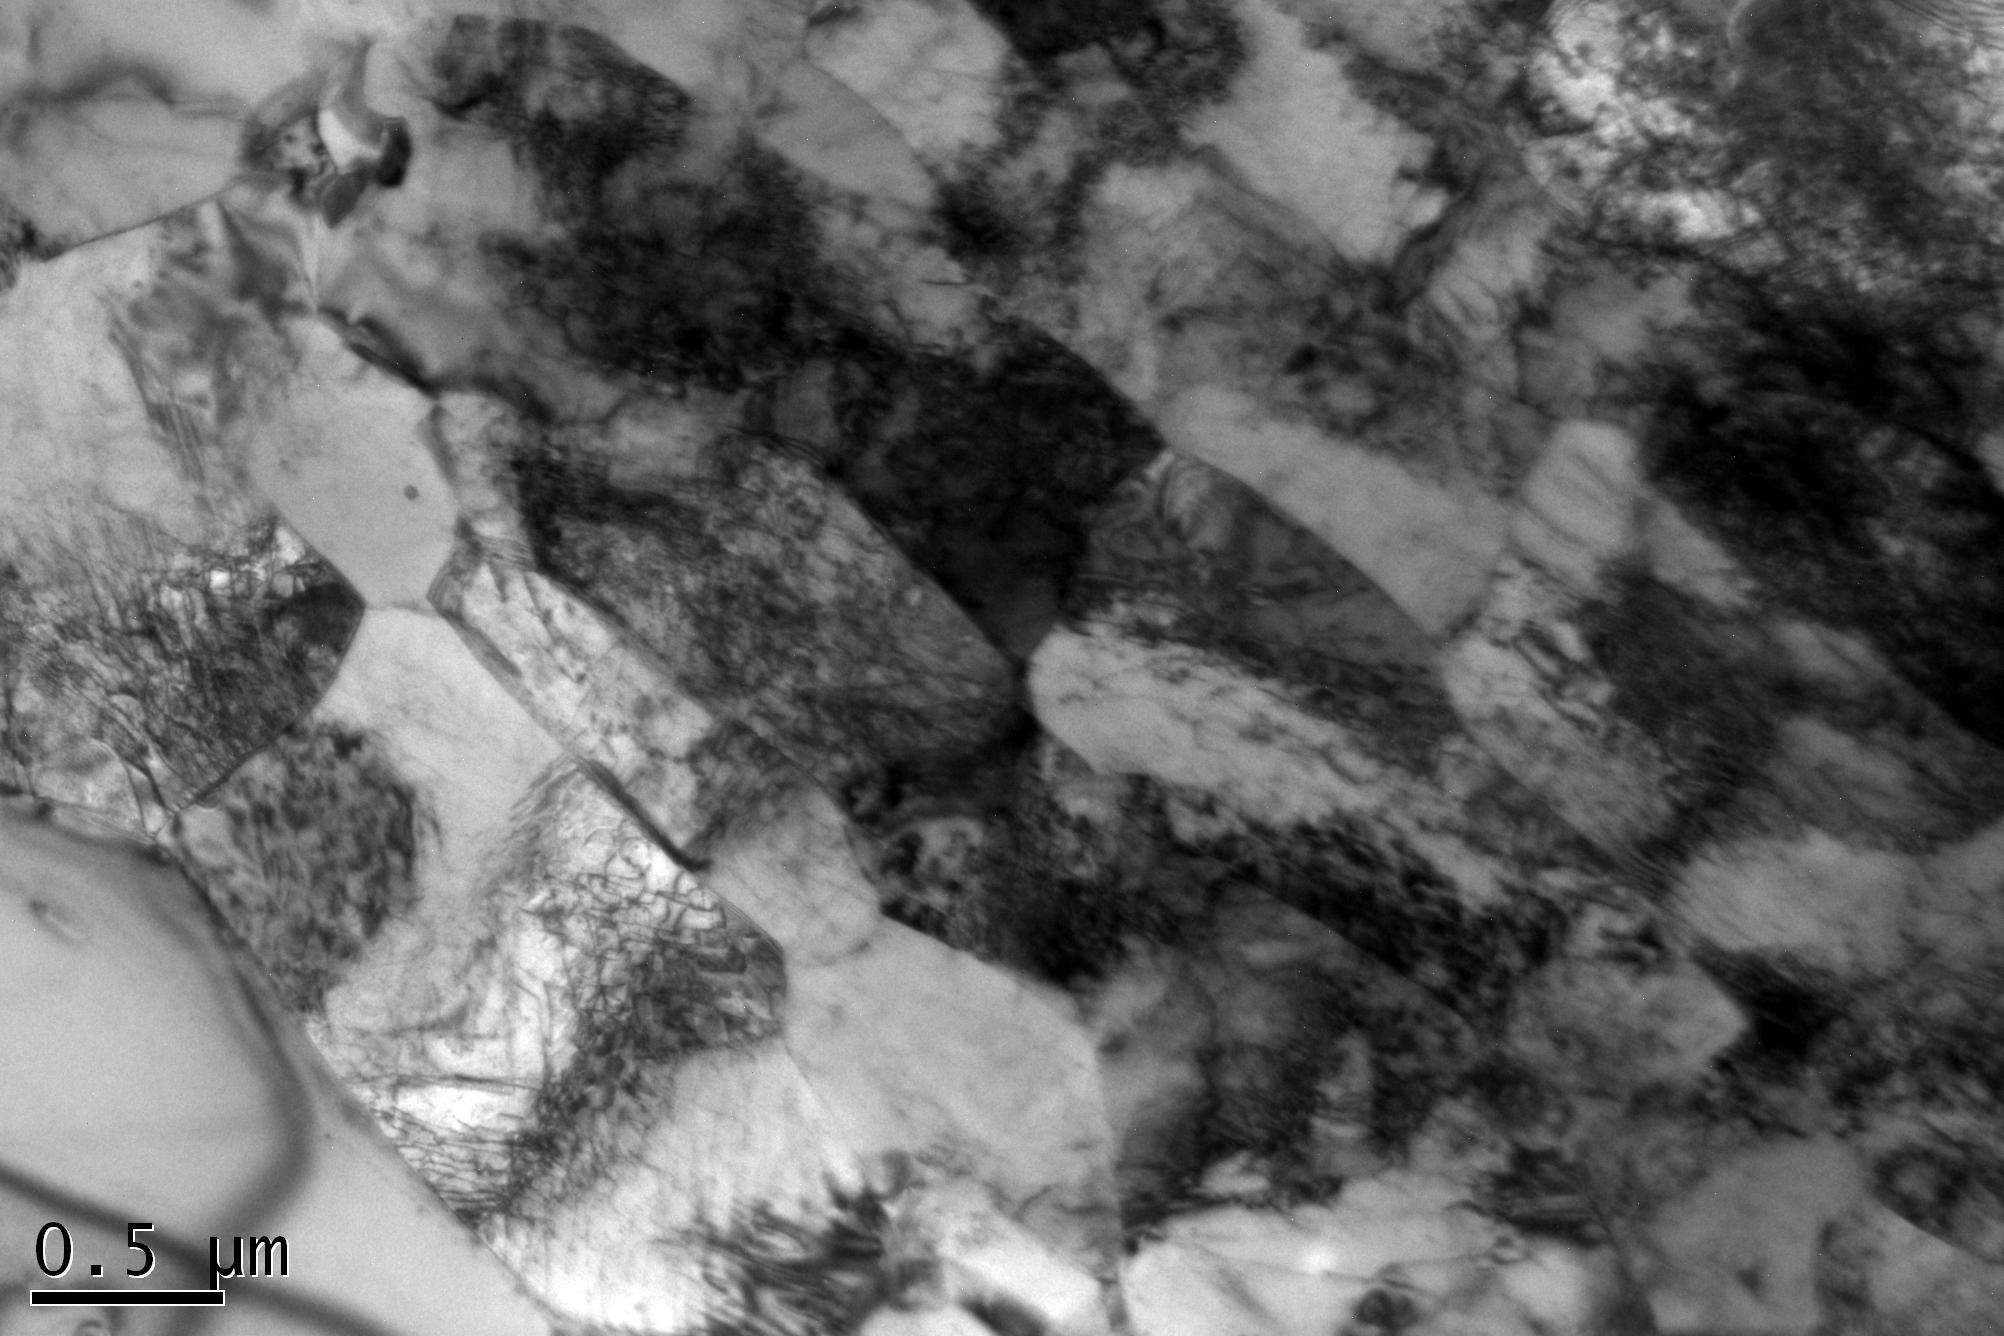 Fig. 2.2.5. TEM micrograph showing grain shape in MA 12Cr ODS alloy.